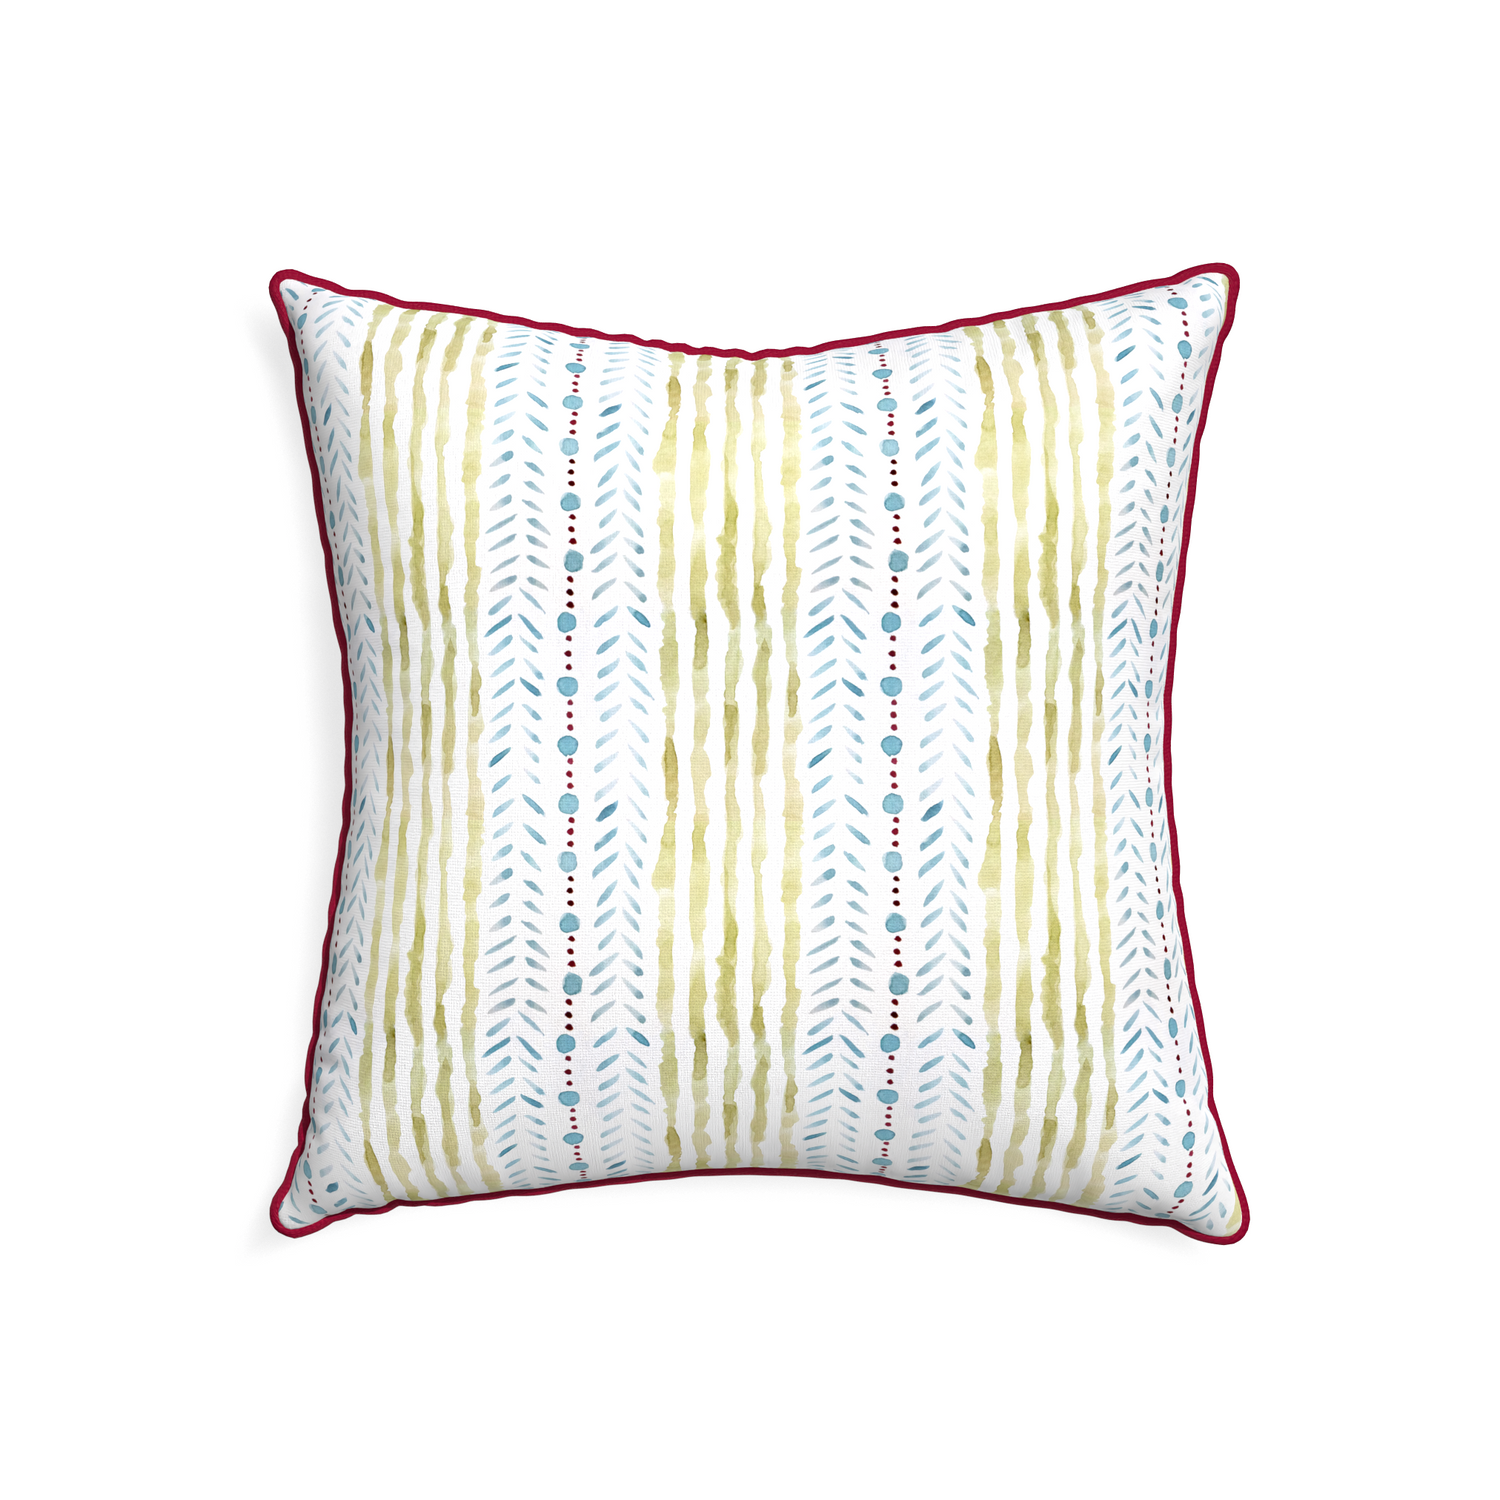 22-square julia custom blue & green stripedpillow with raspberry piping on white background